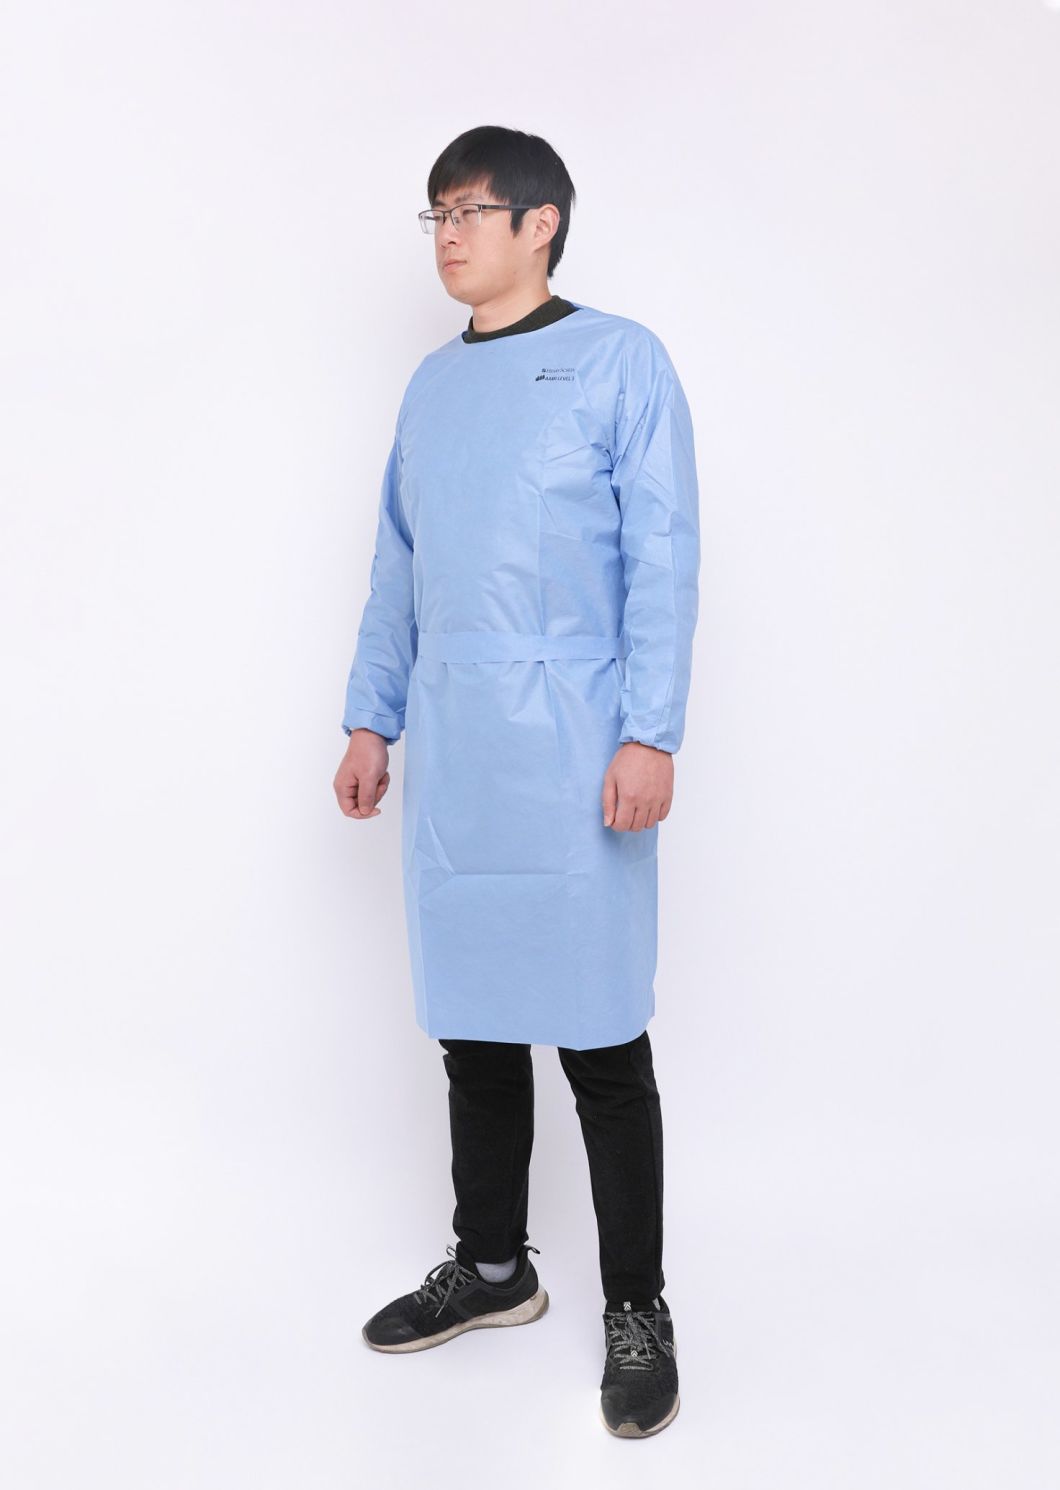 Hot Sale Medical Protective Clothing Isolation Clothing Blocking Bacteria and Viruses Civil Protective Clothing